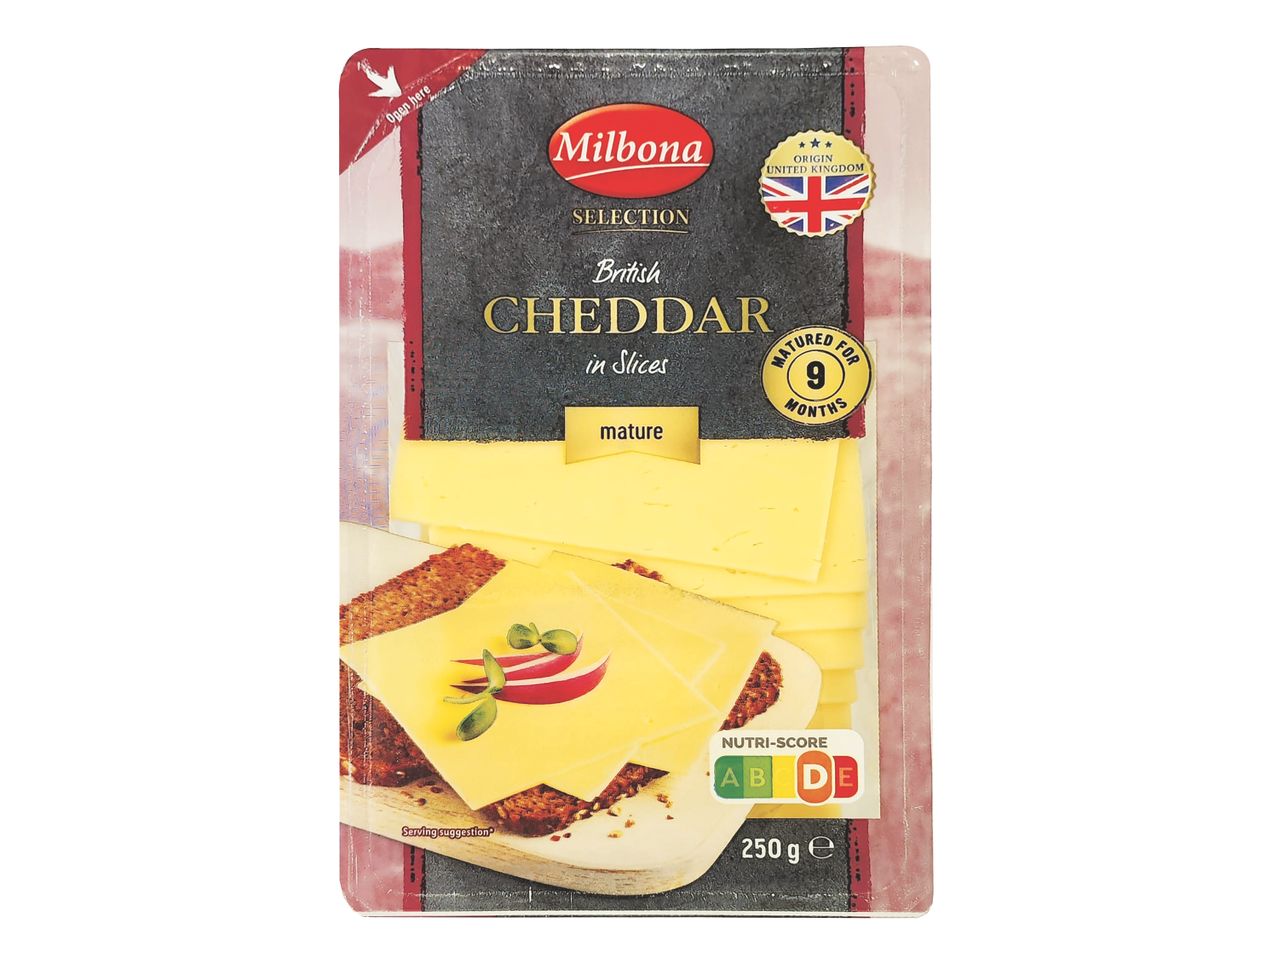 Go to full screen view: Mature Cheddar Slices - Image 1